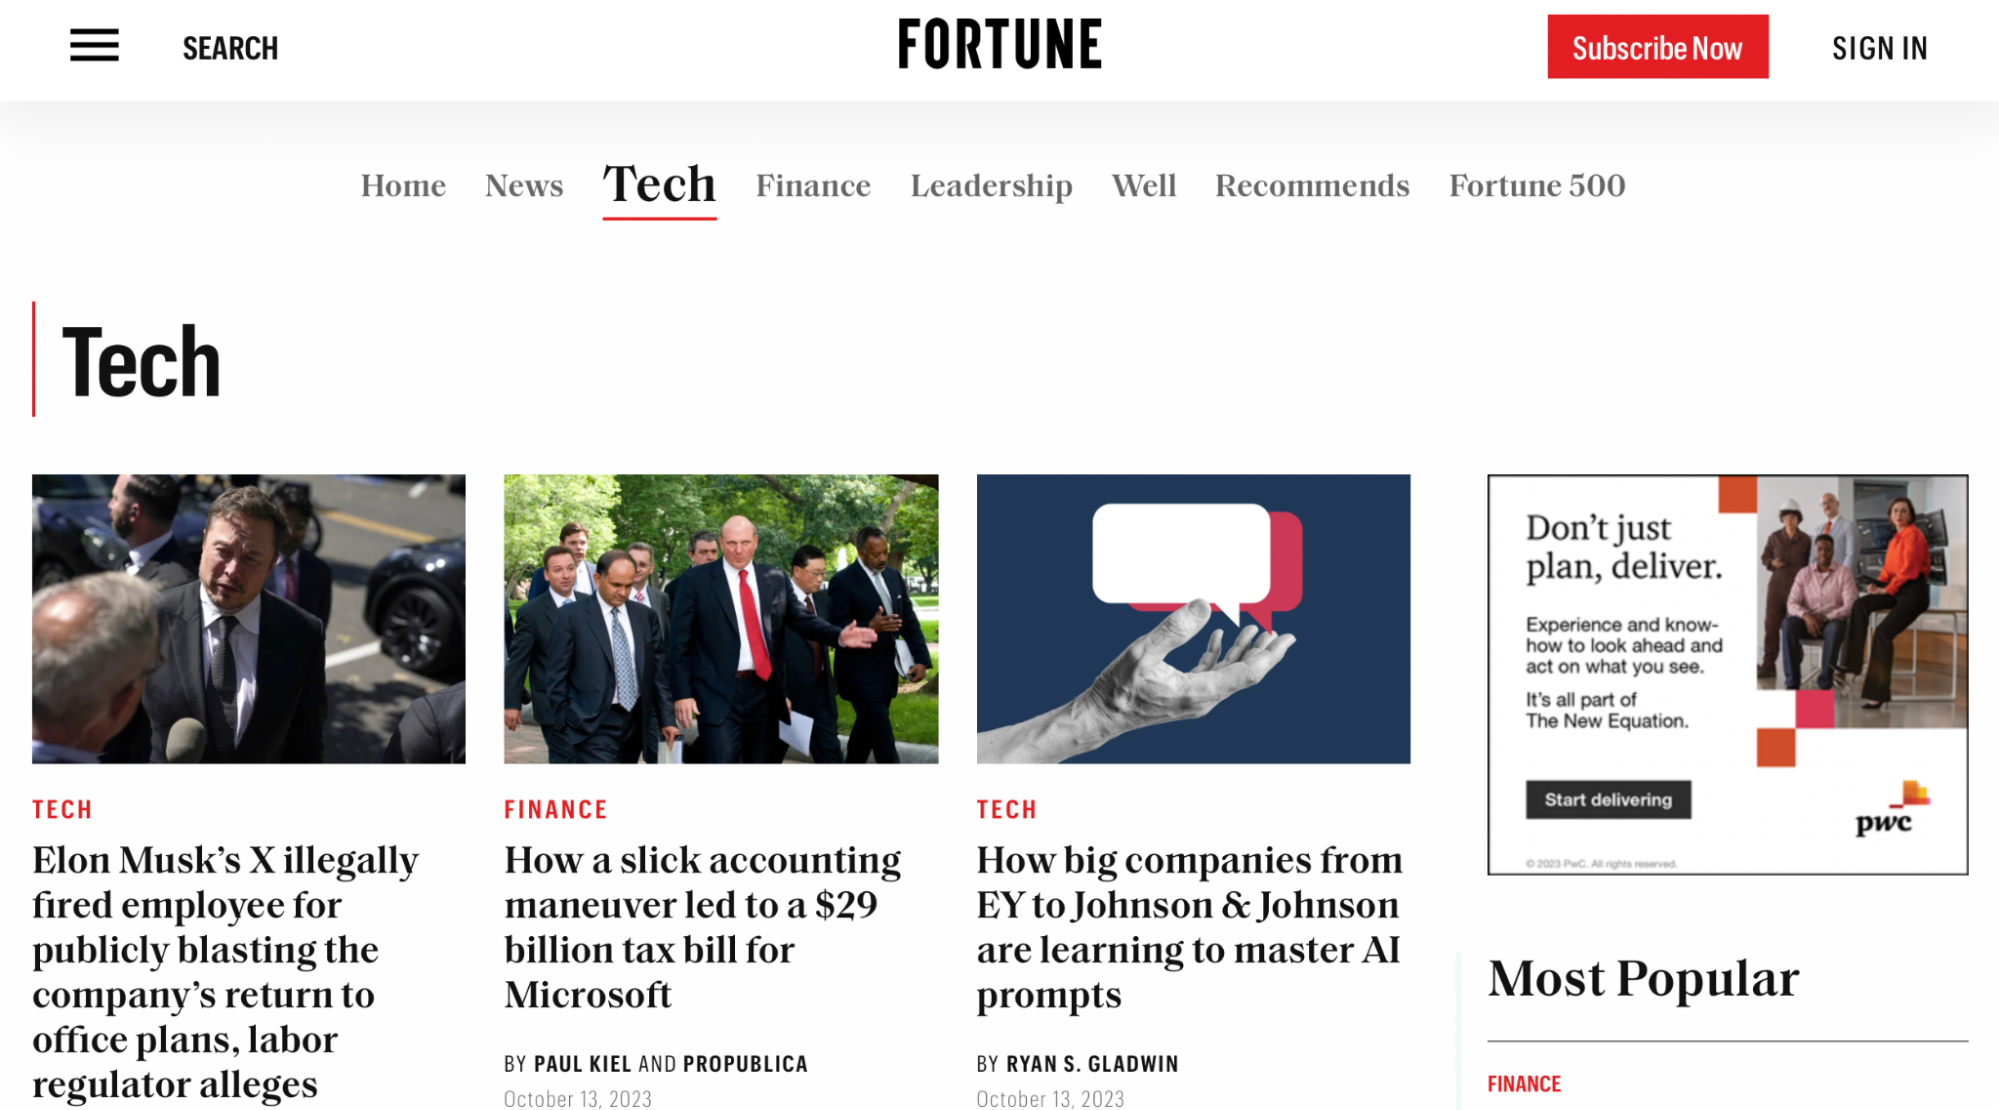 A paid ad for PWC (Price Waterhouse Cooper) appears on the right side of Fortune’s homepage.